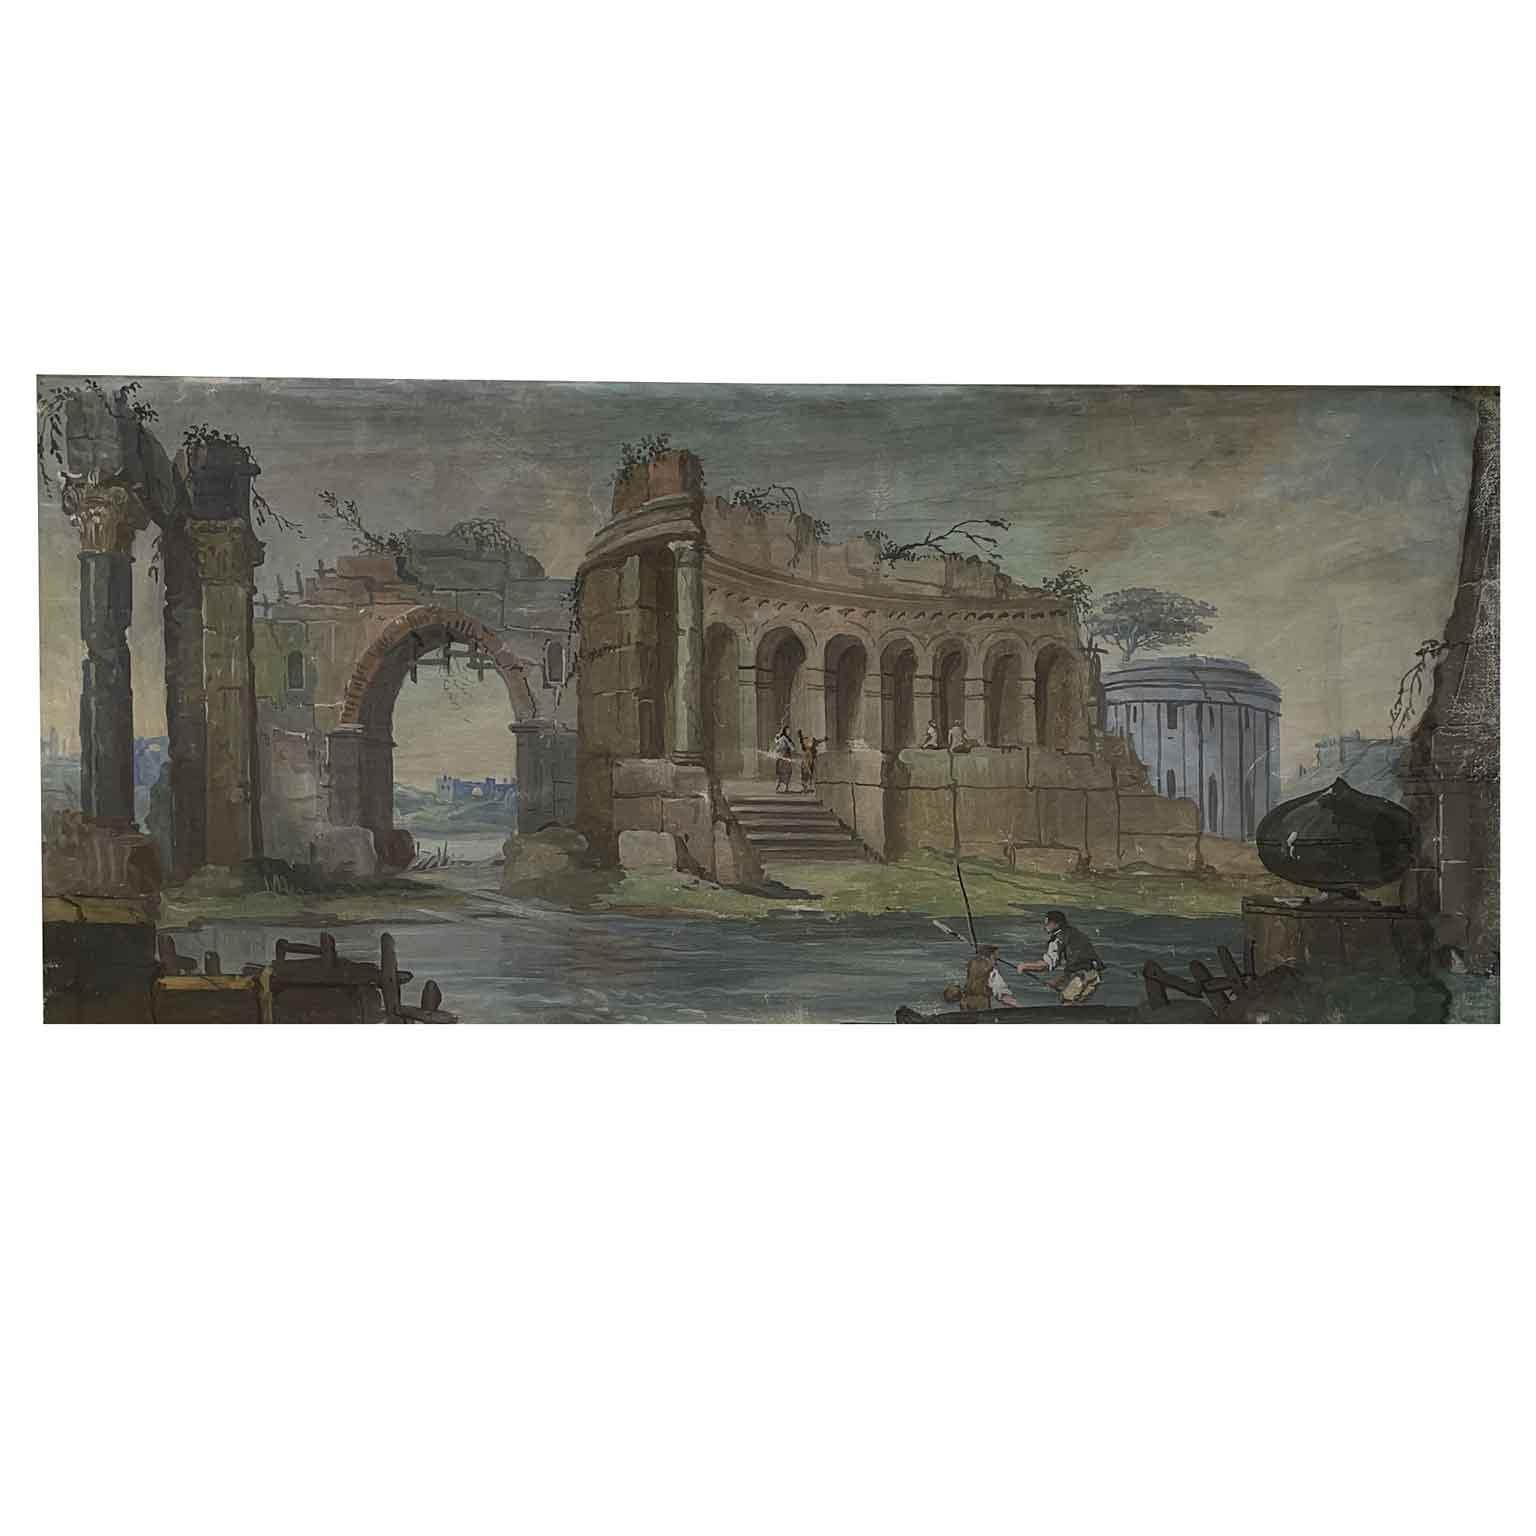 Pair of architectural fantasies with ruins and classical figures, two very decorative Italian Capriccio, Caprices idealized landscapes featuring a gray-blue tempera color on canvas, realized in Italy in the first half of 20th century,  set in pale